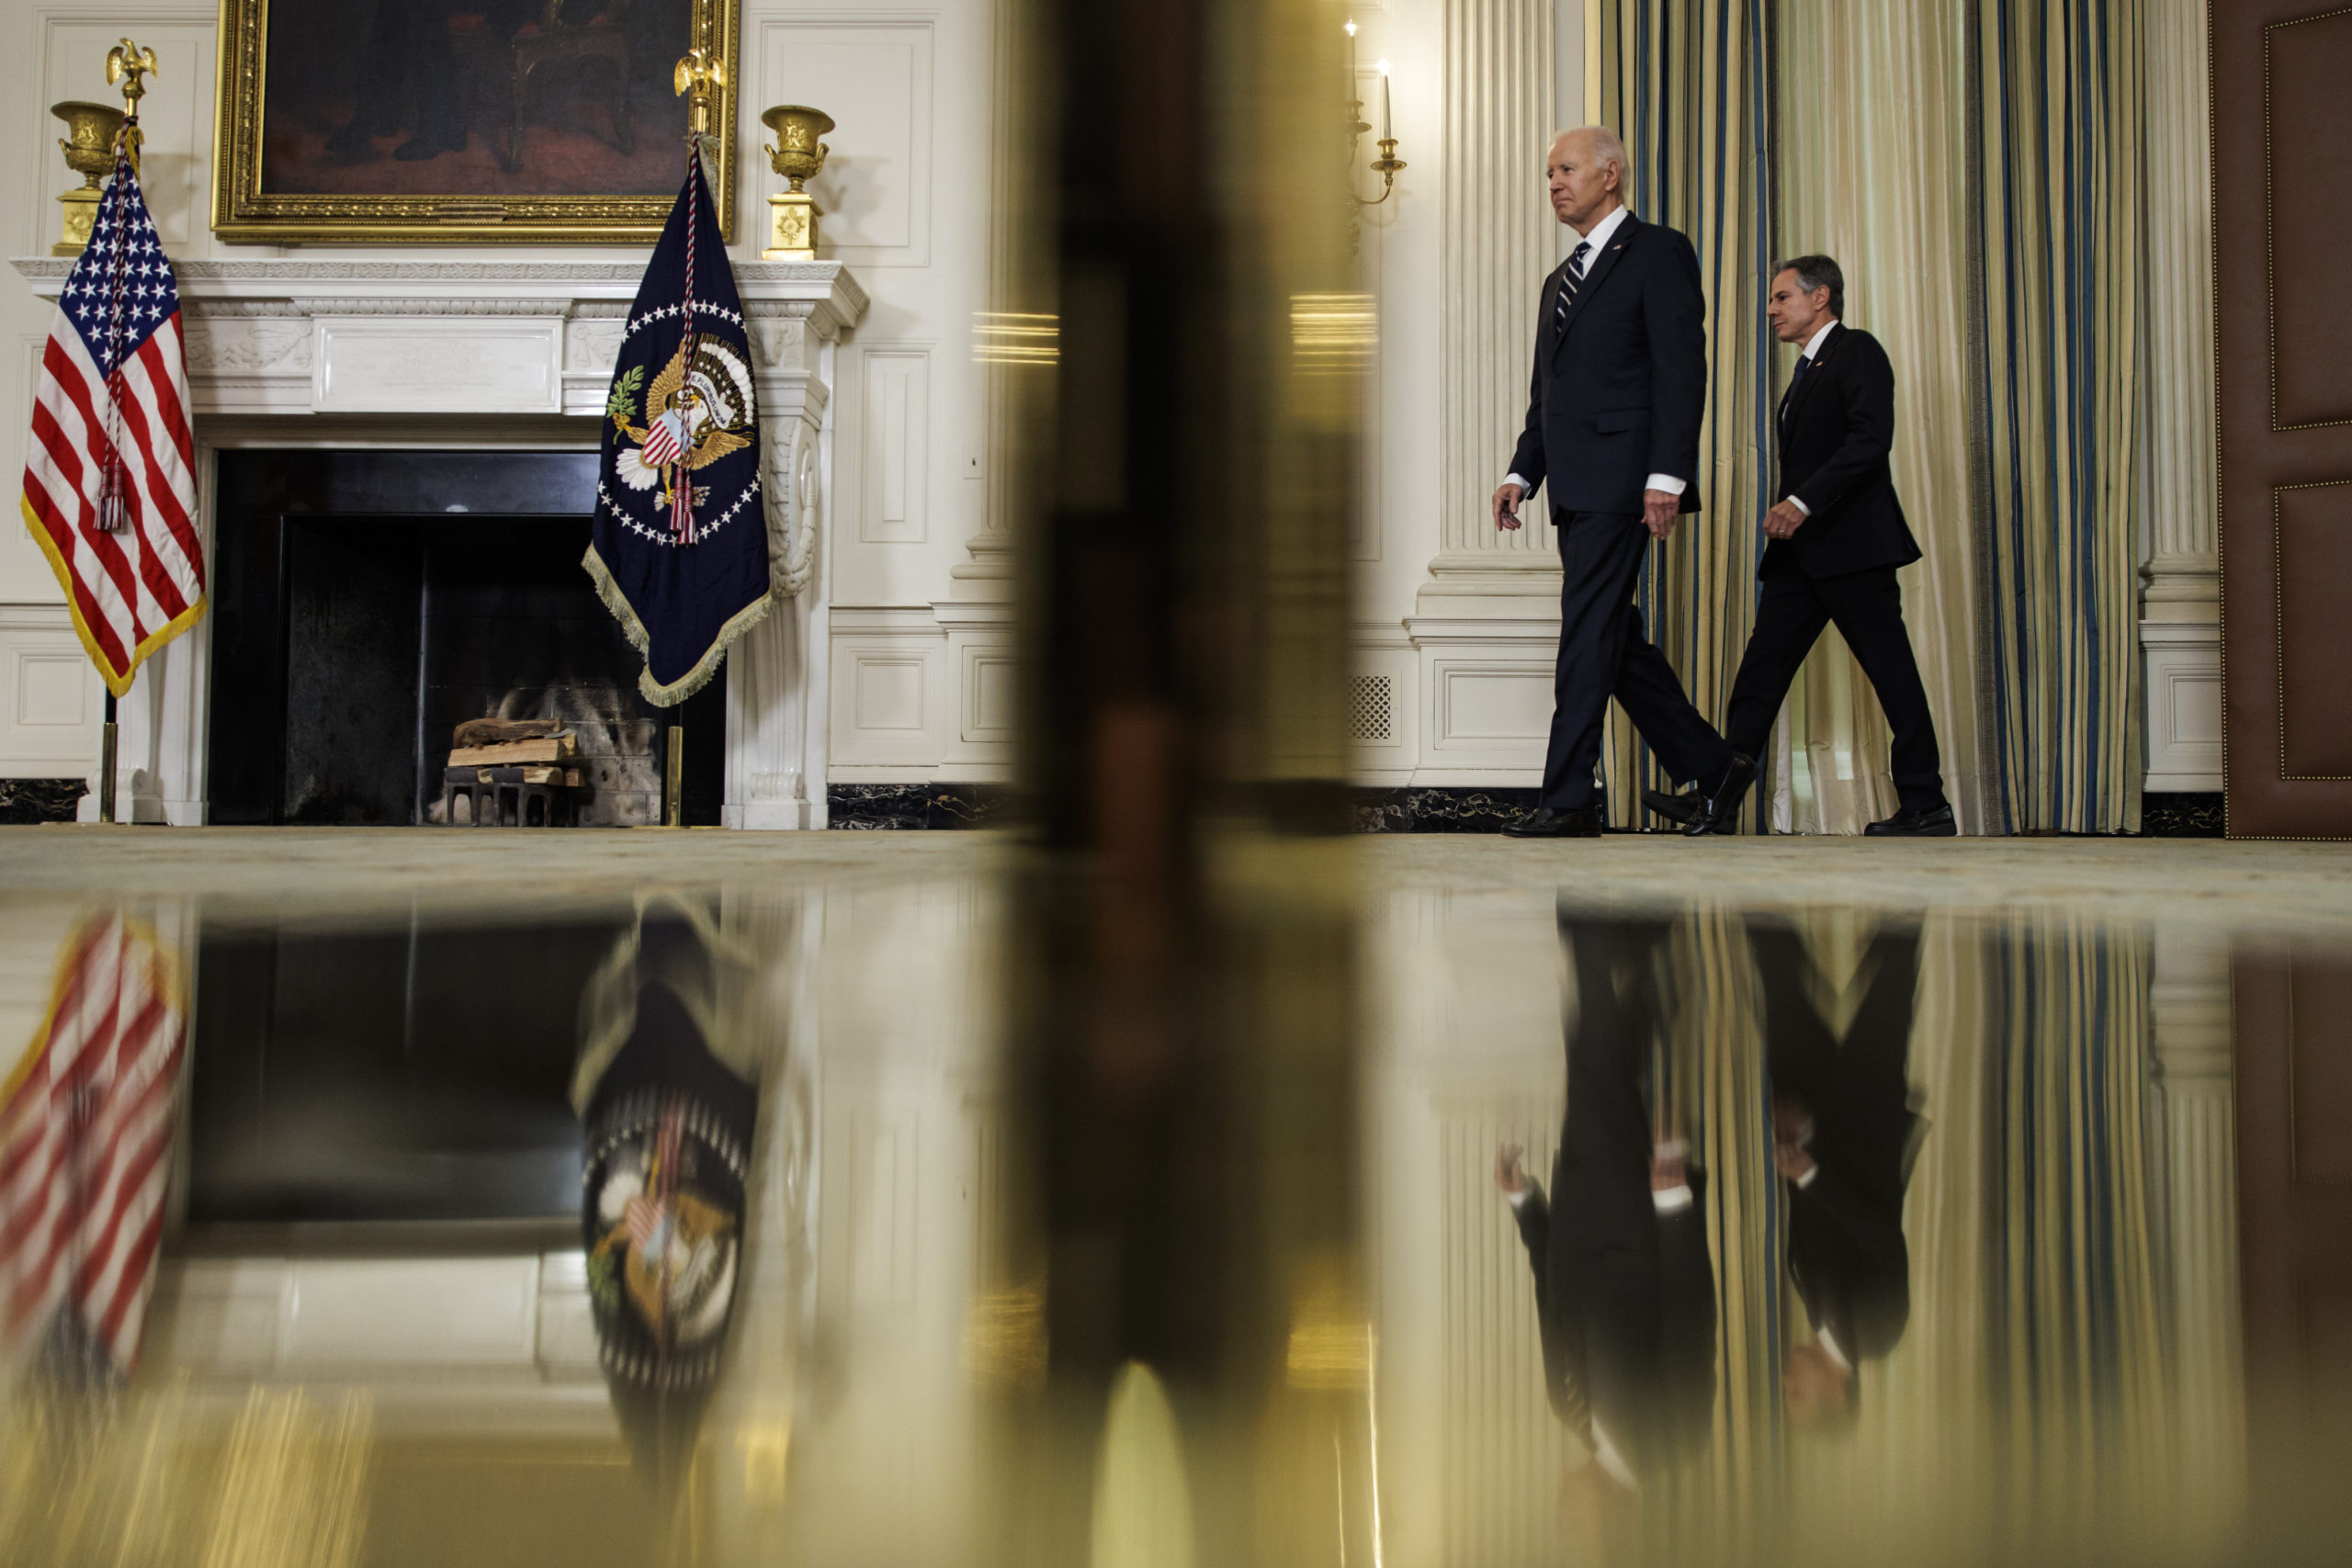 President Joe Biden and Secretary of State Antony Blinken walk into the State Dining Room to deliver remarks on the terrorist attacks in Israel at the White House on October 7, 2023 in Washington, DC. The White House has said that senior national security officials have briefed the President on the attacks on Israel that were carried out by Hamas overnight and White House officials remain in close contact with their counterparts in Israel. (Photo by Samuel Corum/Getty Images)